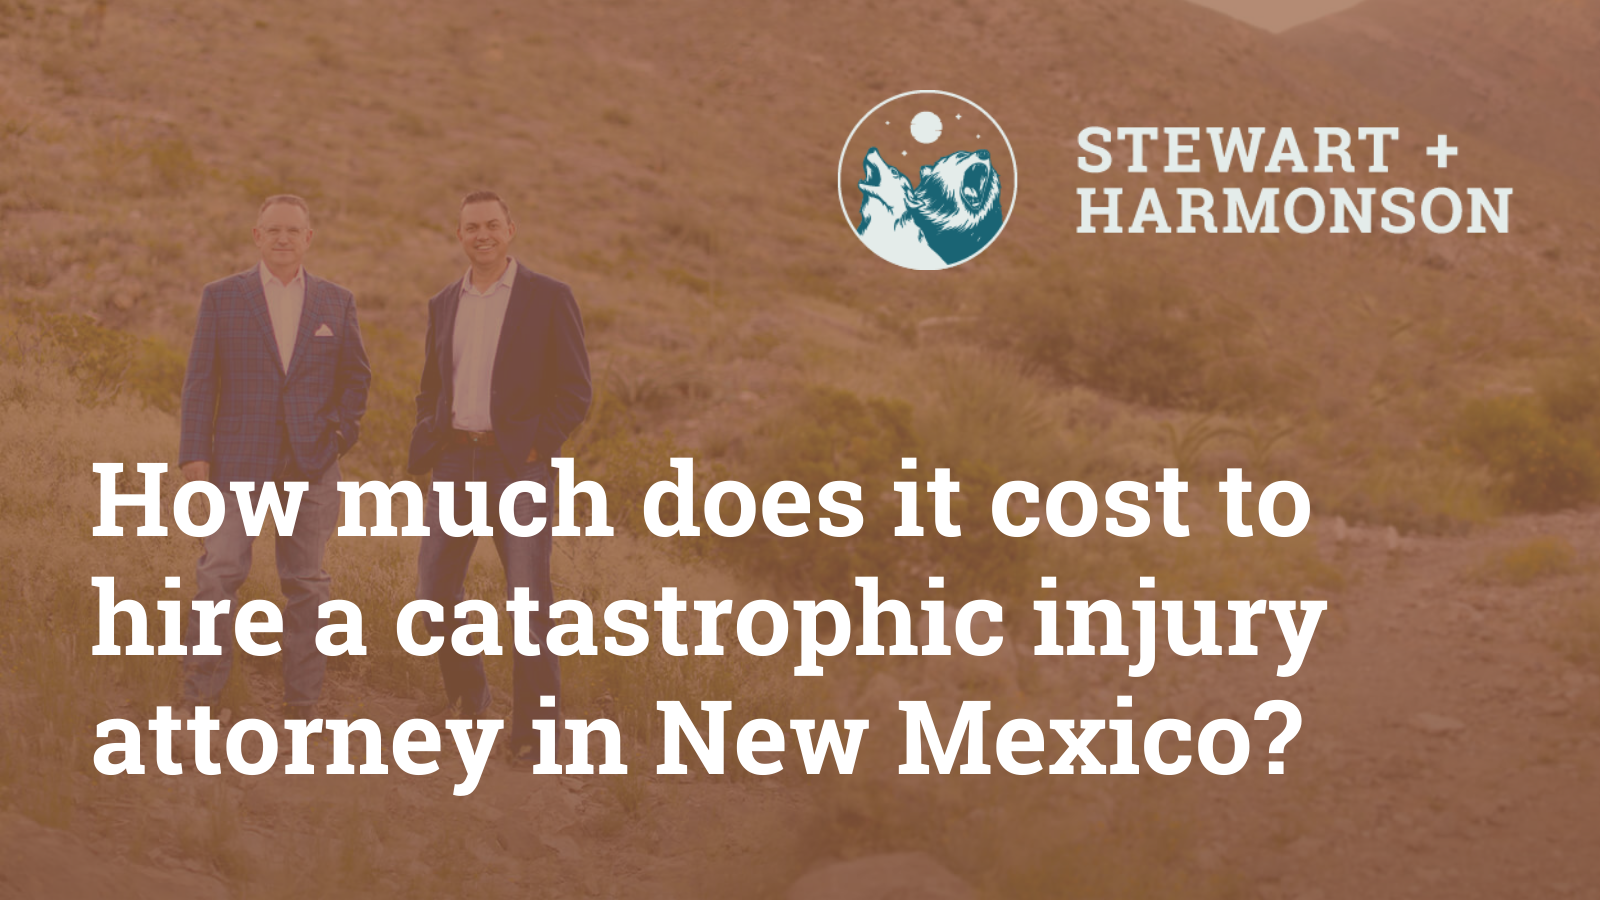 cost to hire a catastrophic injury attorney in New Mexico - Stewart Harmonson Law Firm - New Mexico